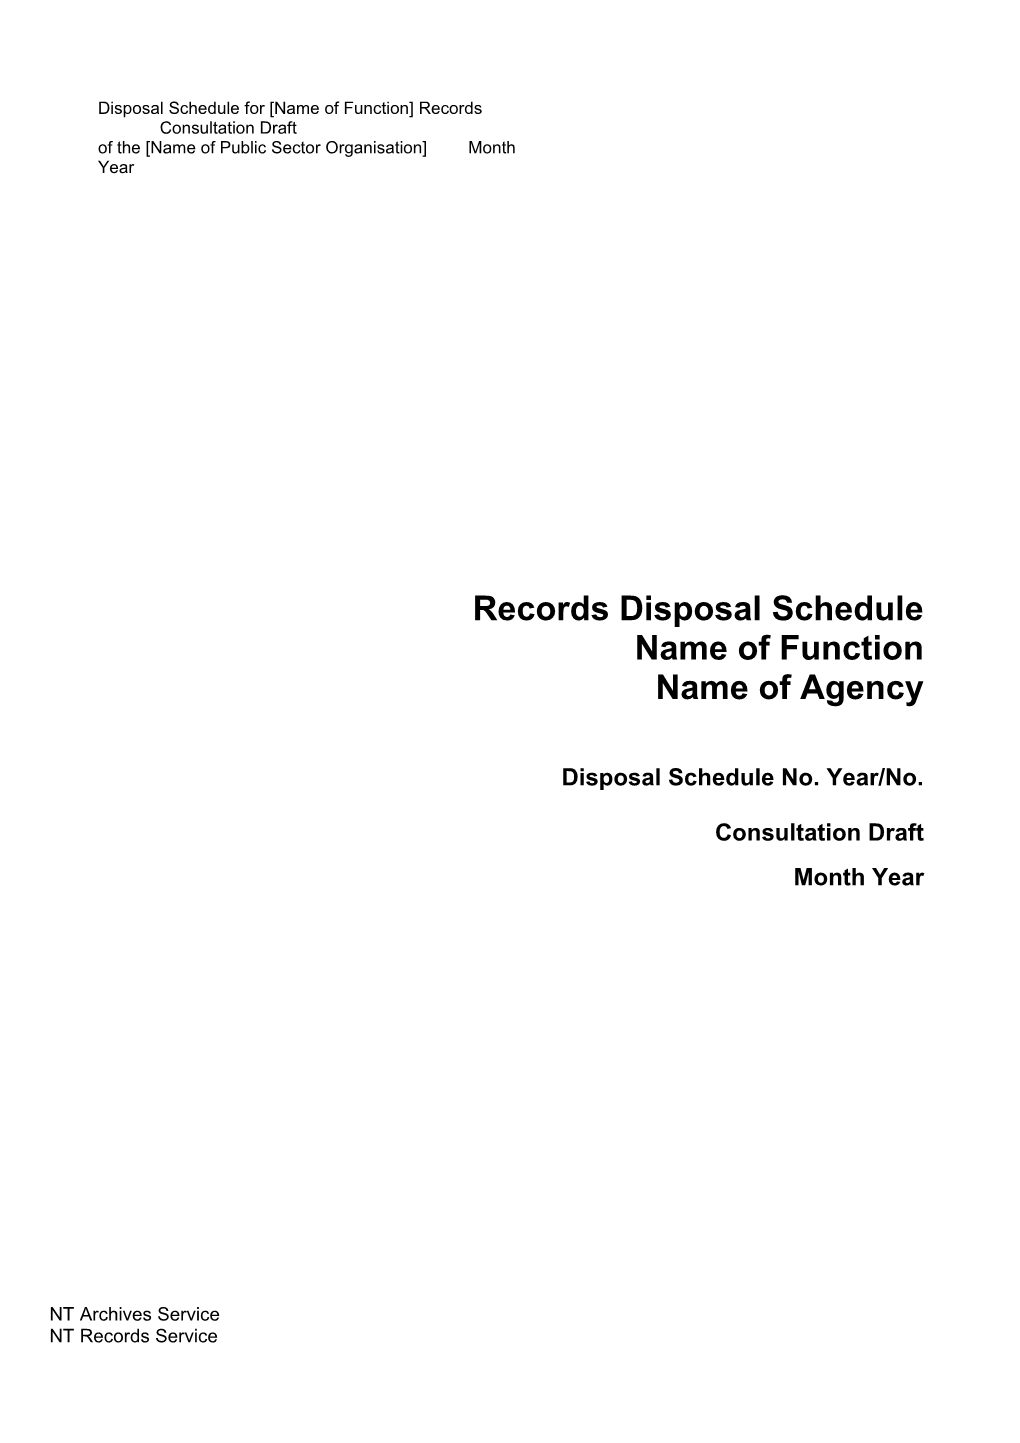 Records Disposal Schedule